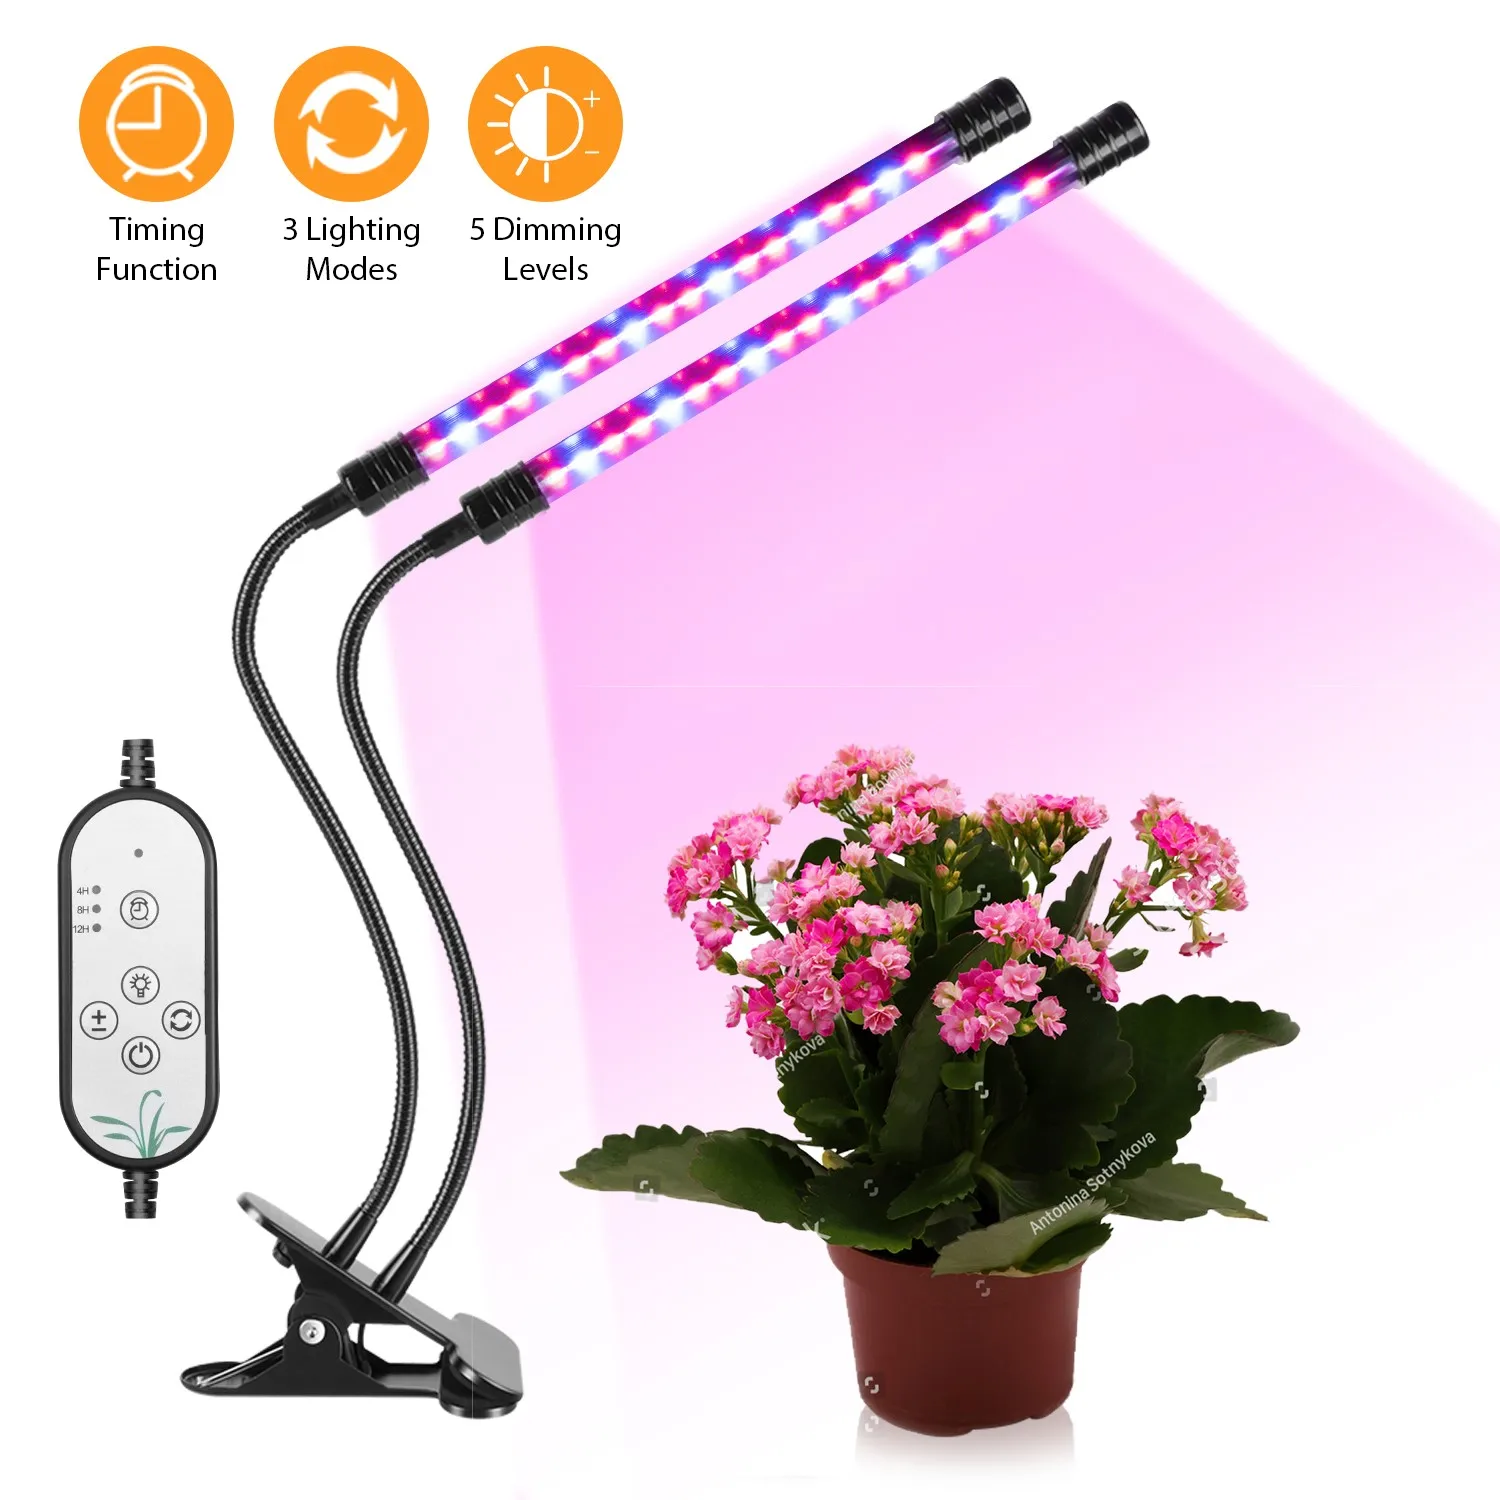 

LED Grow Light Full Spectrum Phytolamp for Plants With Clip Dimmable Phyto lamp USB DC 5V 10W/20W/30W/40W Sunlike Growth Light